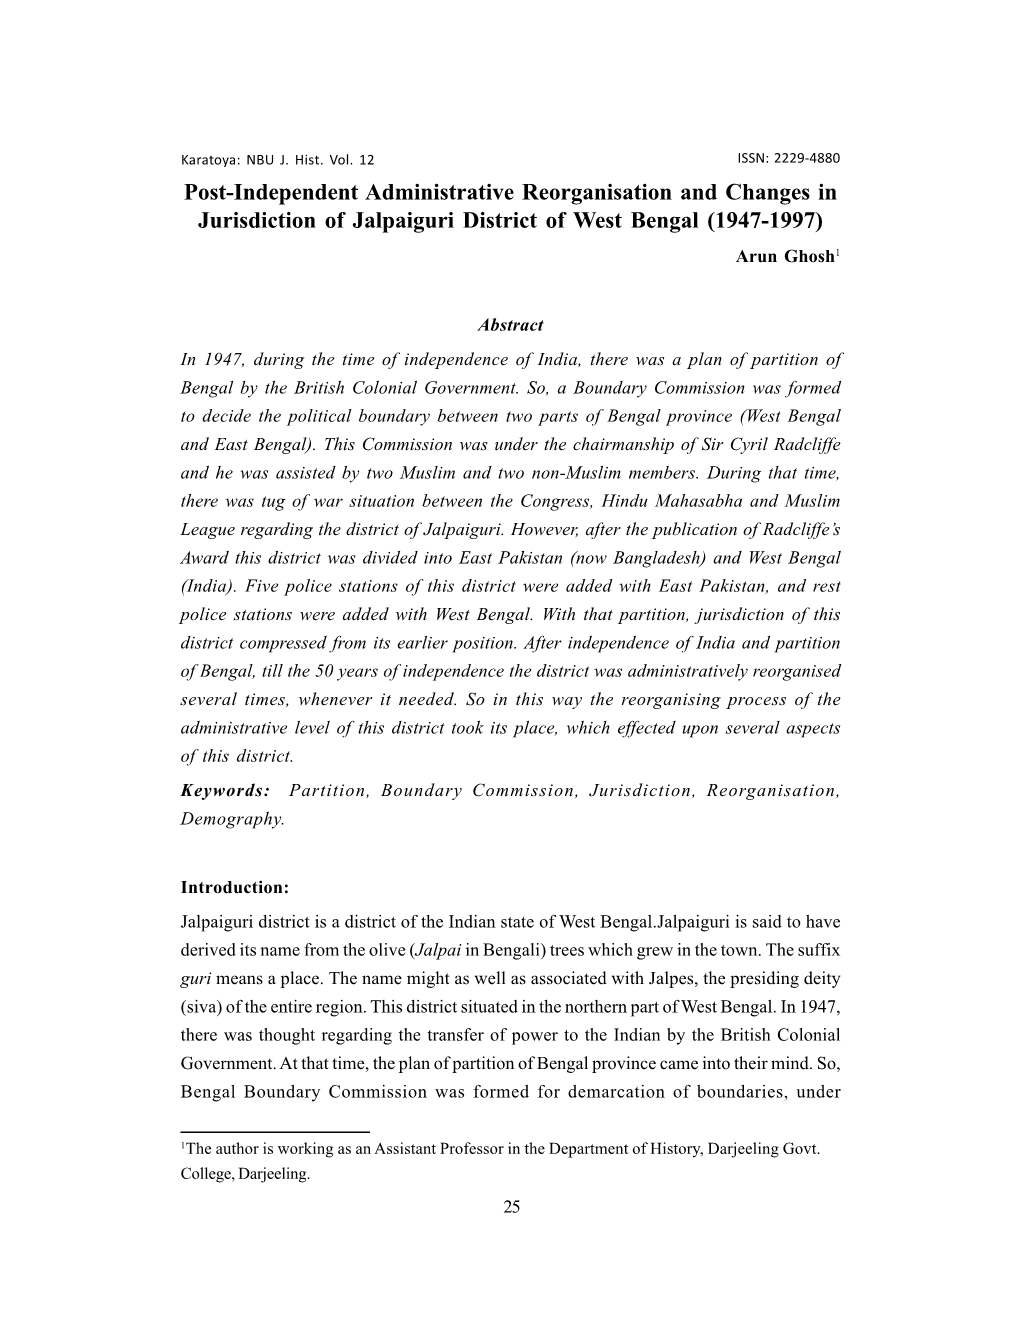 Post-Independent Administrative Reorganisation and Changes in Jurisdiction of Jalpaiguri District of West Bengal (1947-1997) Arun Ghosh1